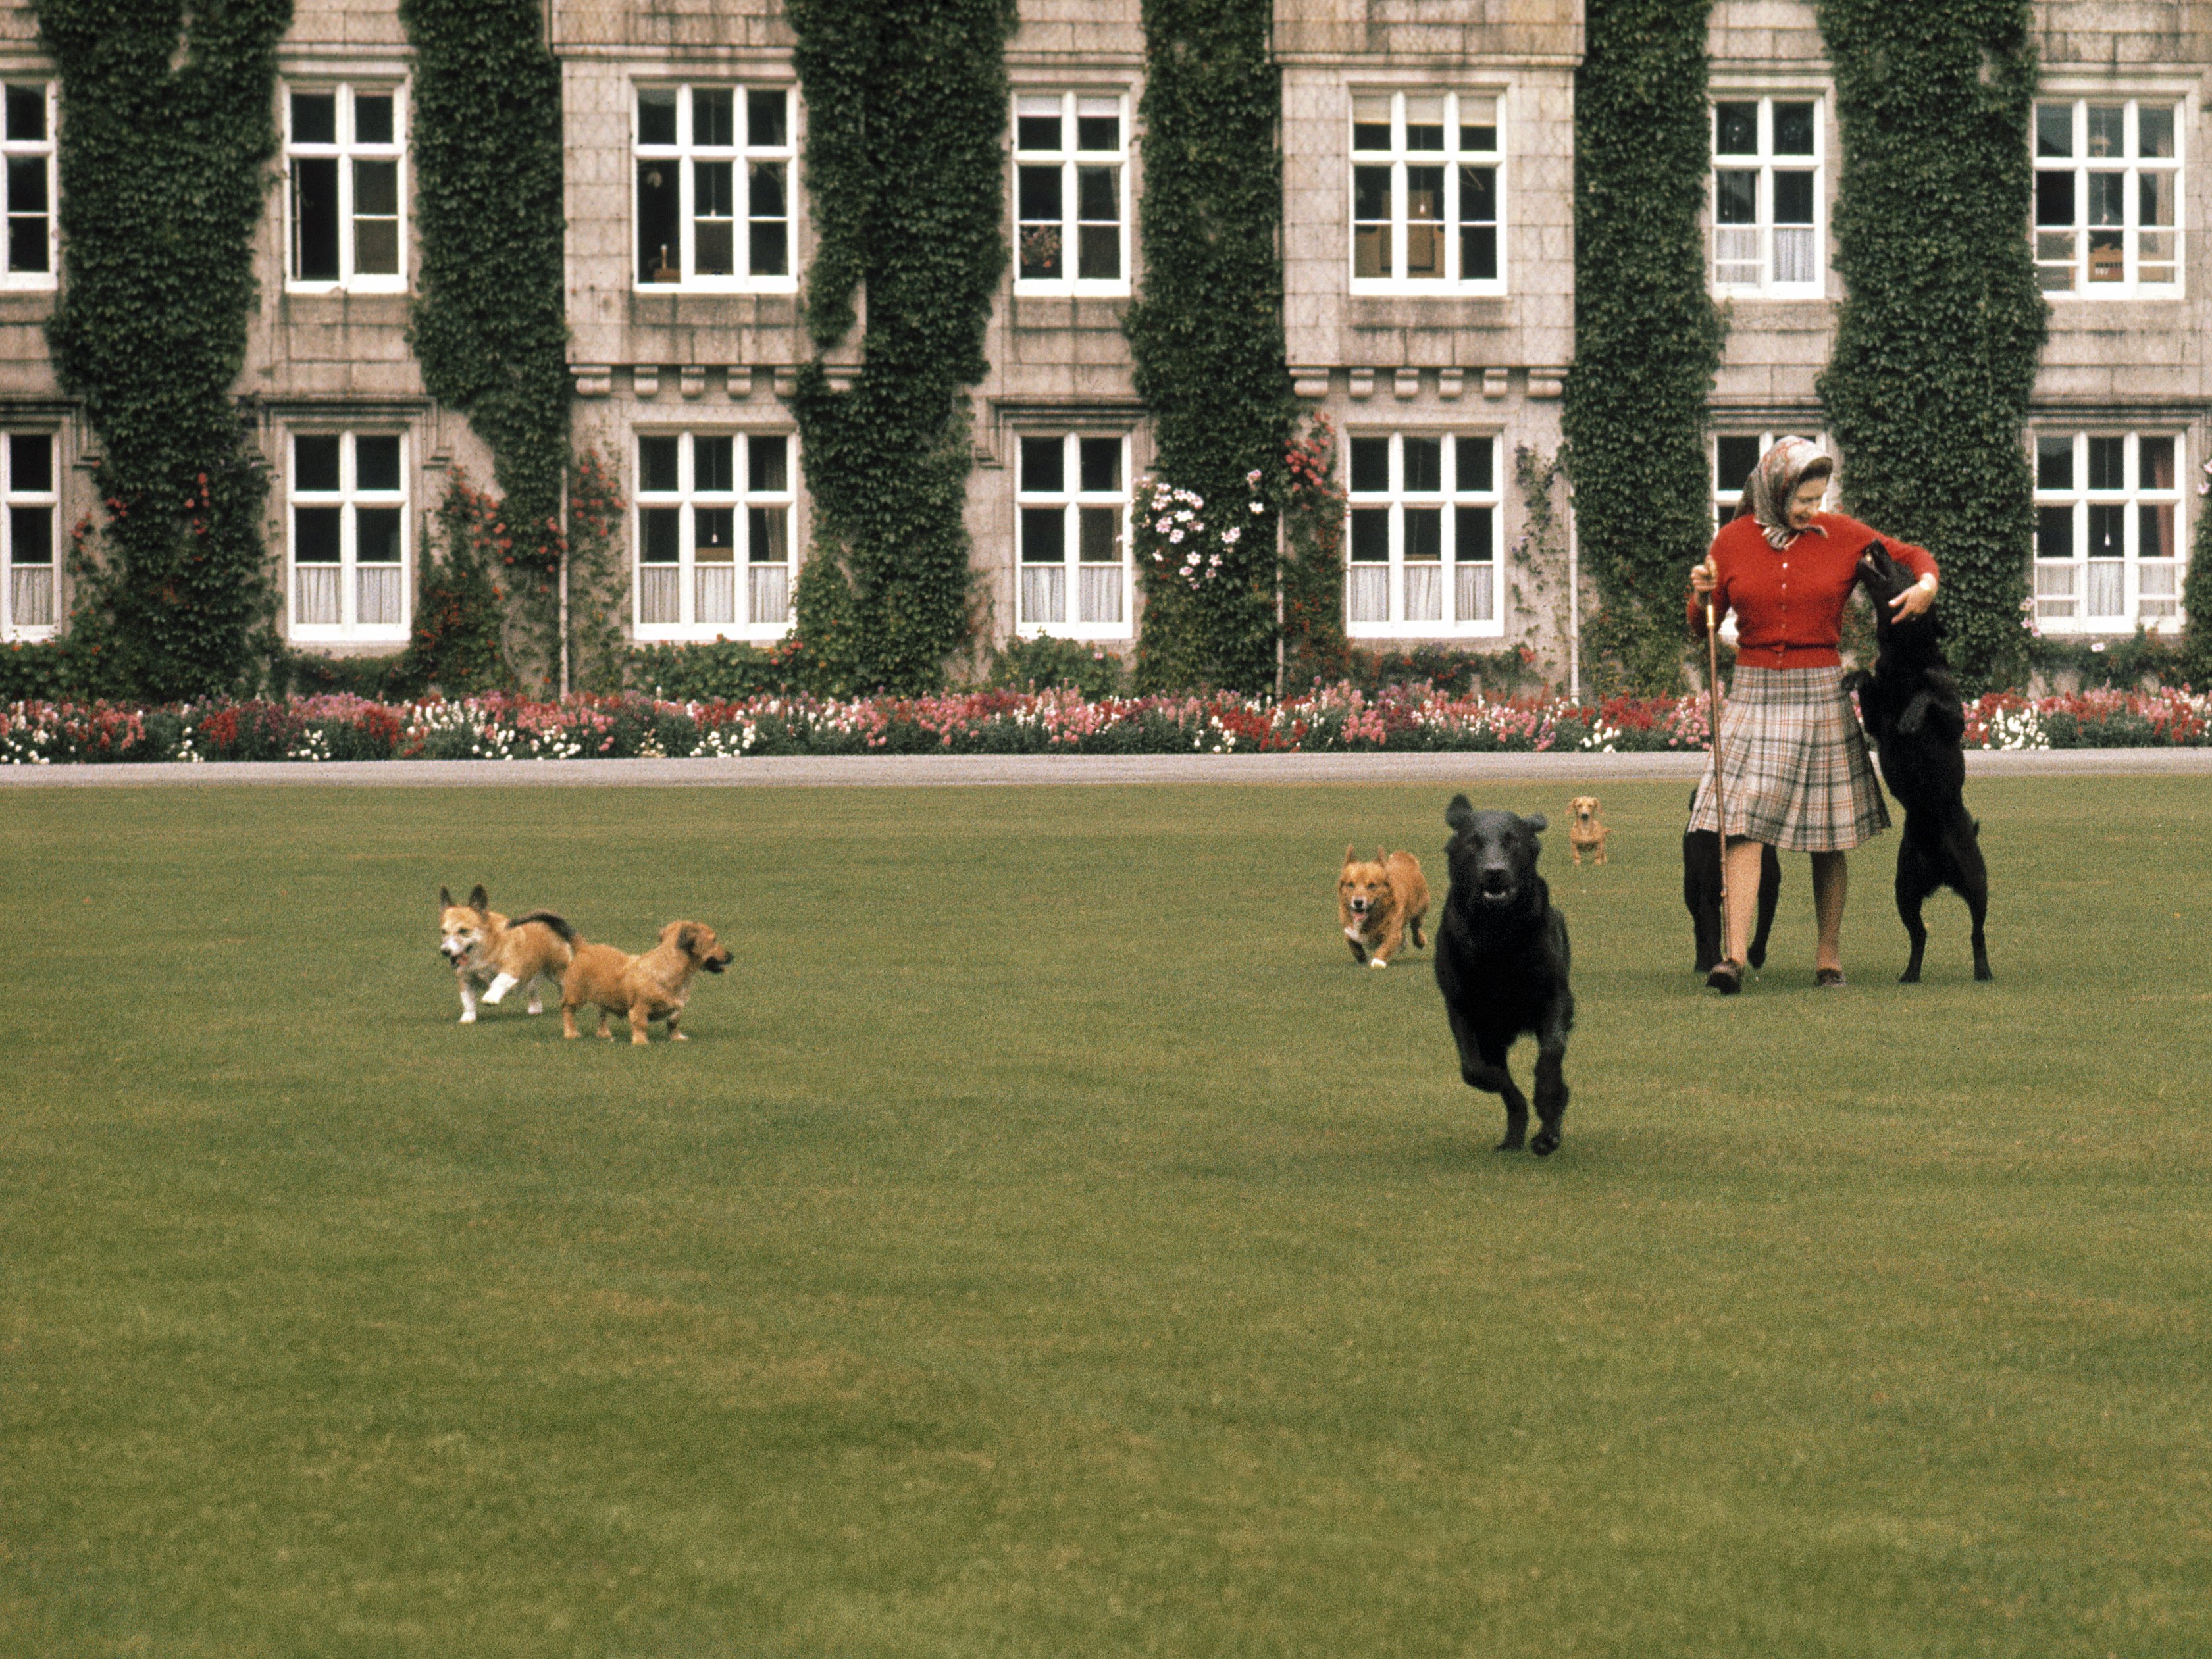 The Queen with her dogs on the lawn in front of Balmoral Castle, Scotland during the Royal Family's annual summer holiday in September 1971. | Source: Getty Images